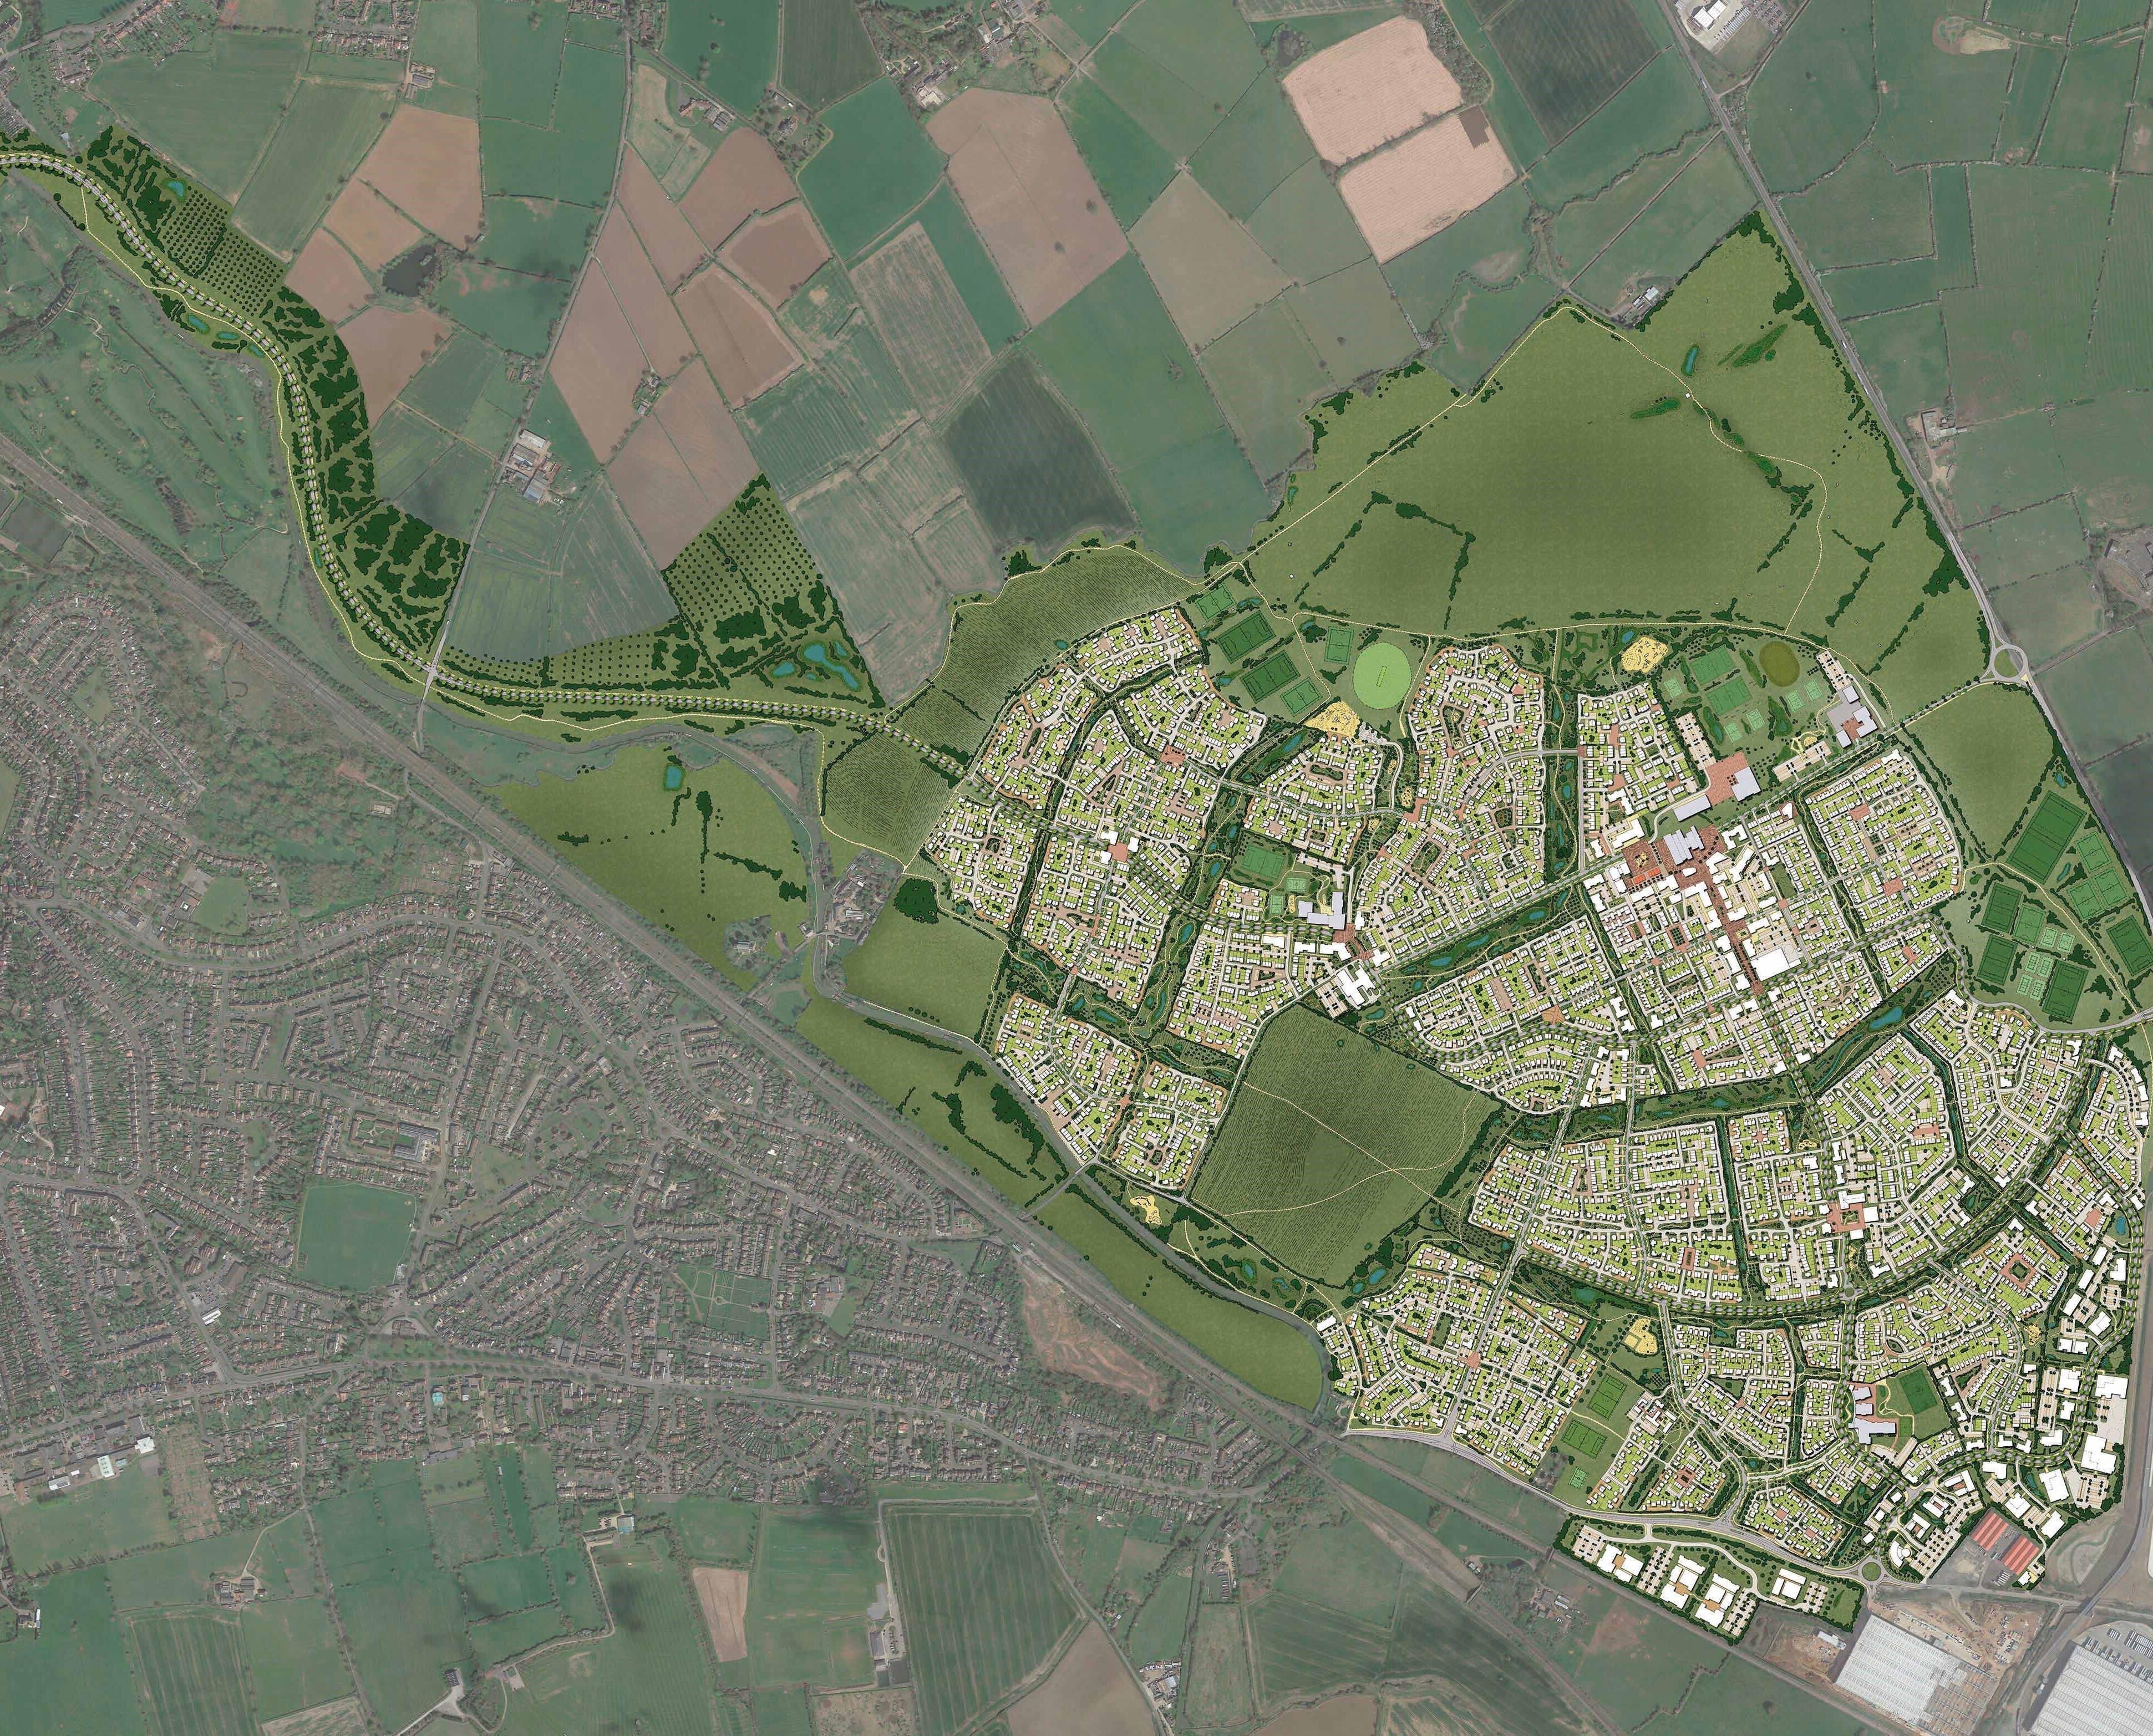 An illustration showing the proposed development at Houlton. © JTP